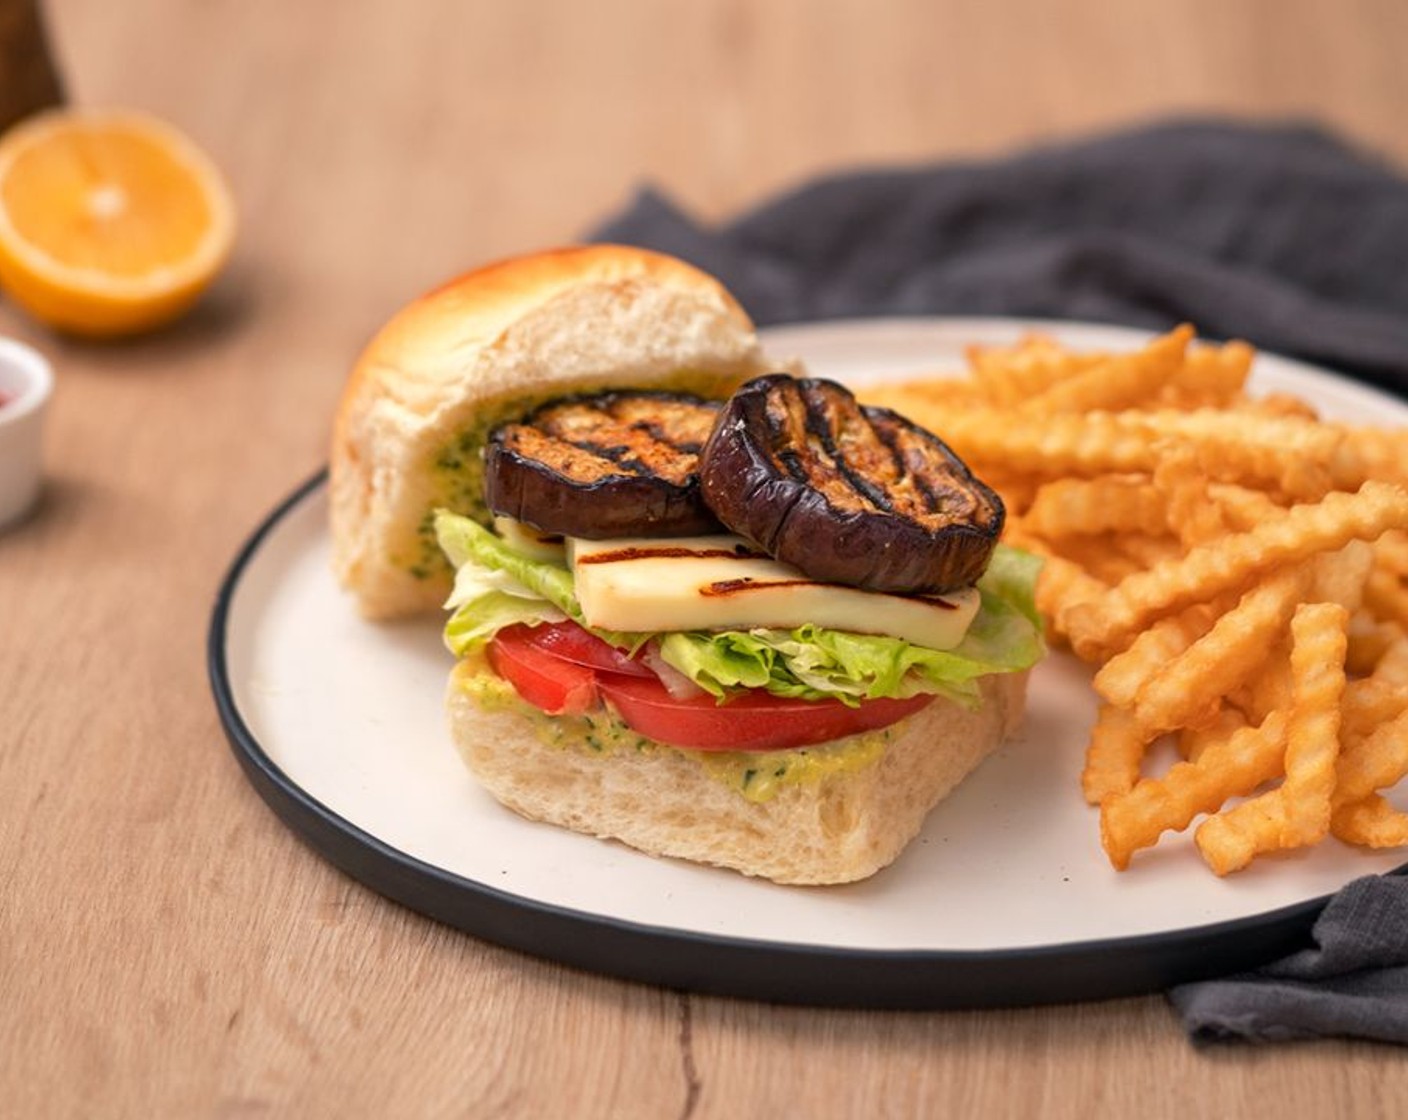 Grilled Eggplant Burger with Halloumi